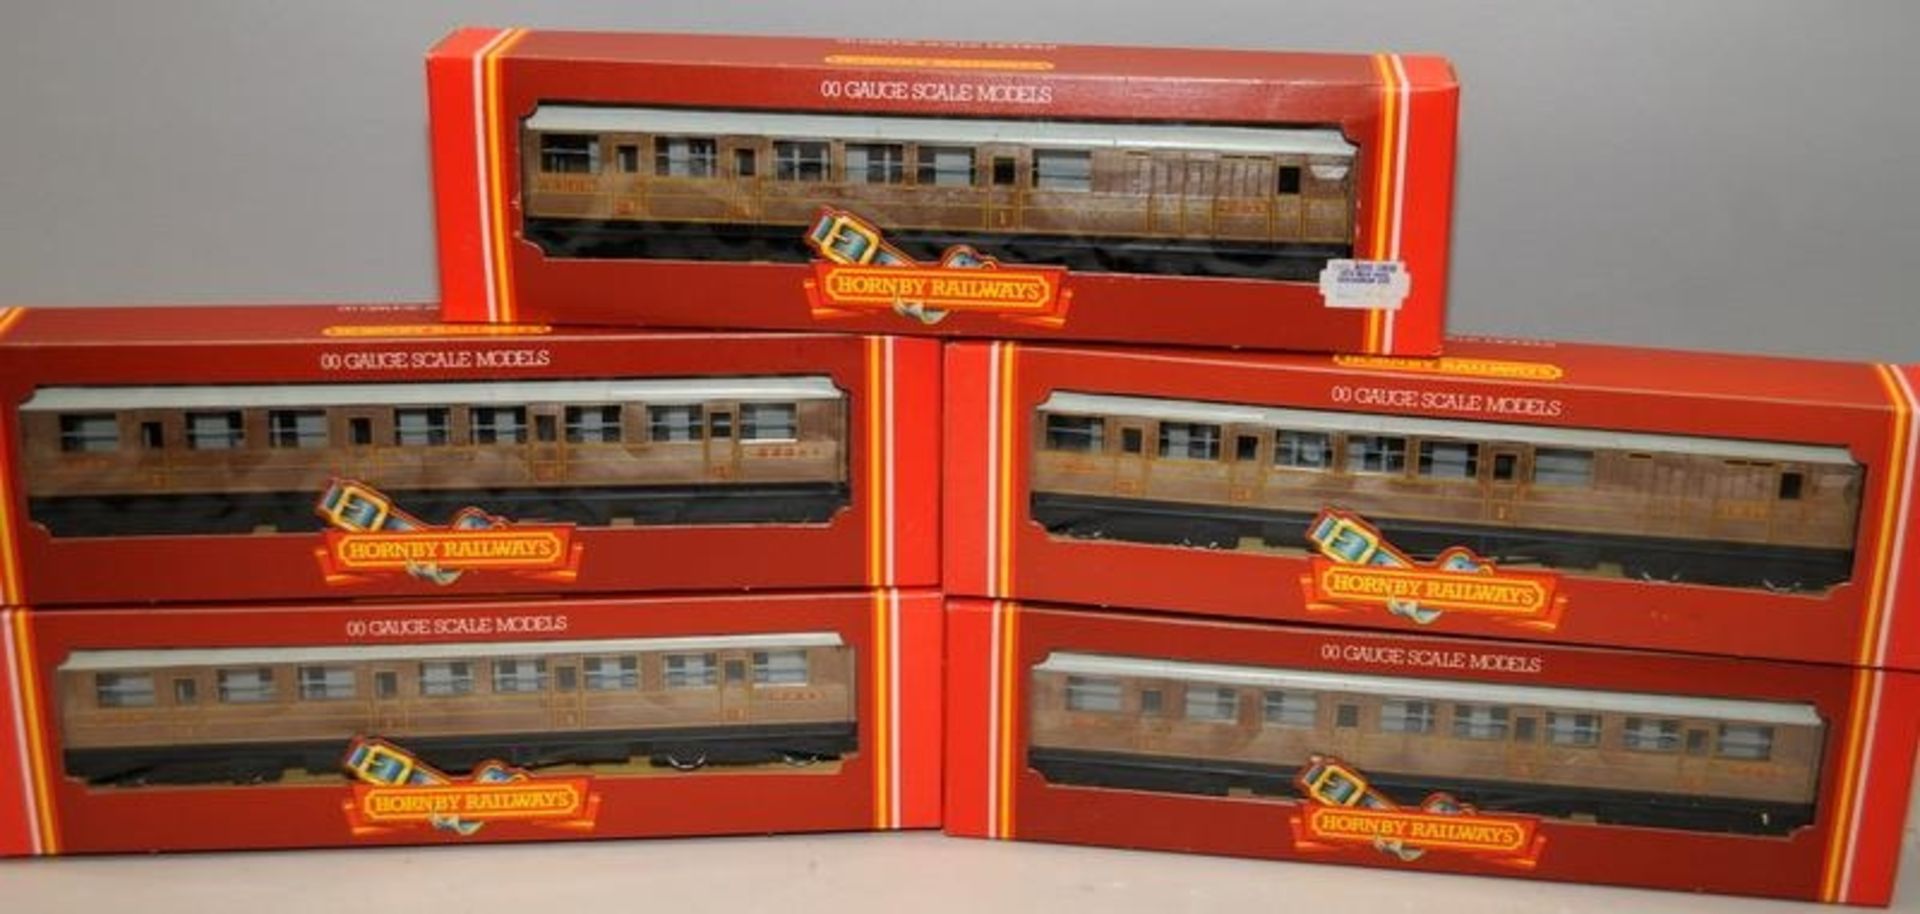 Hornby OO gauge LNER Teak Finish Livery Carriages, R477 x 3 and R478 x 2. 5 in lot, all boxed